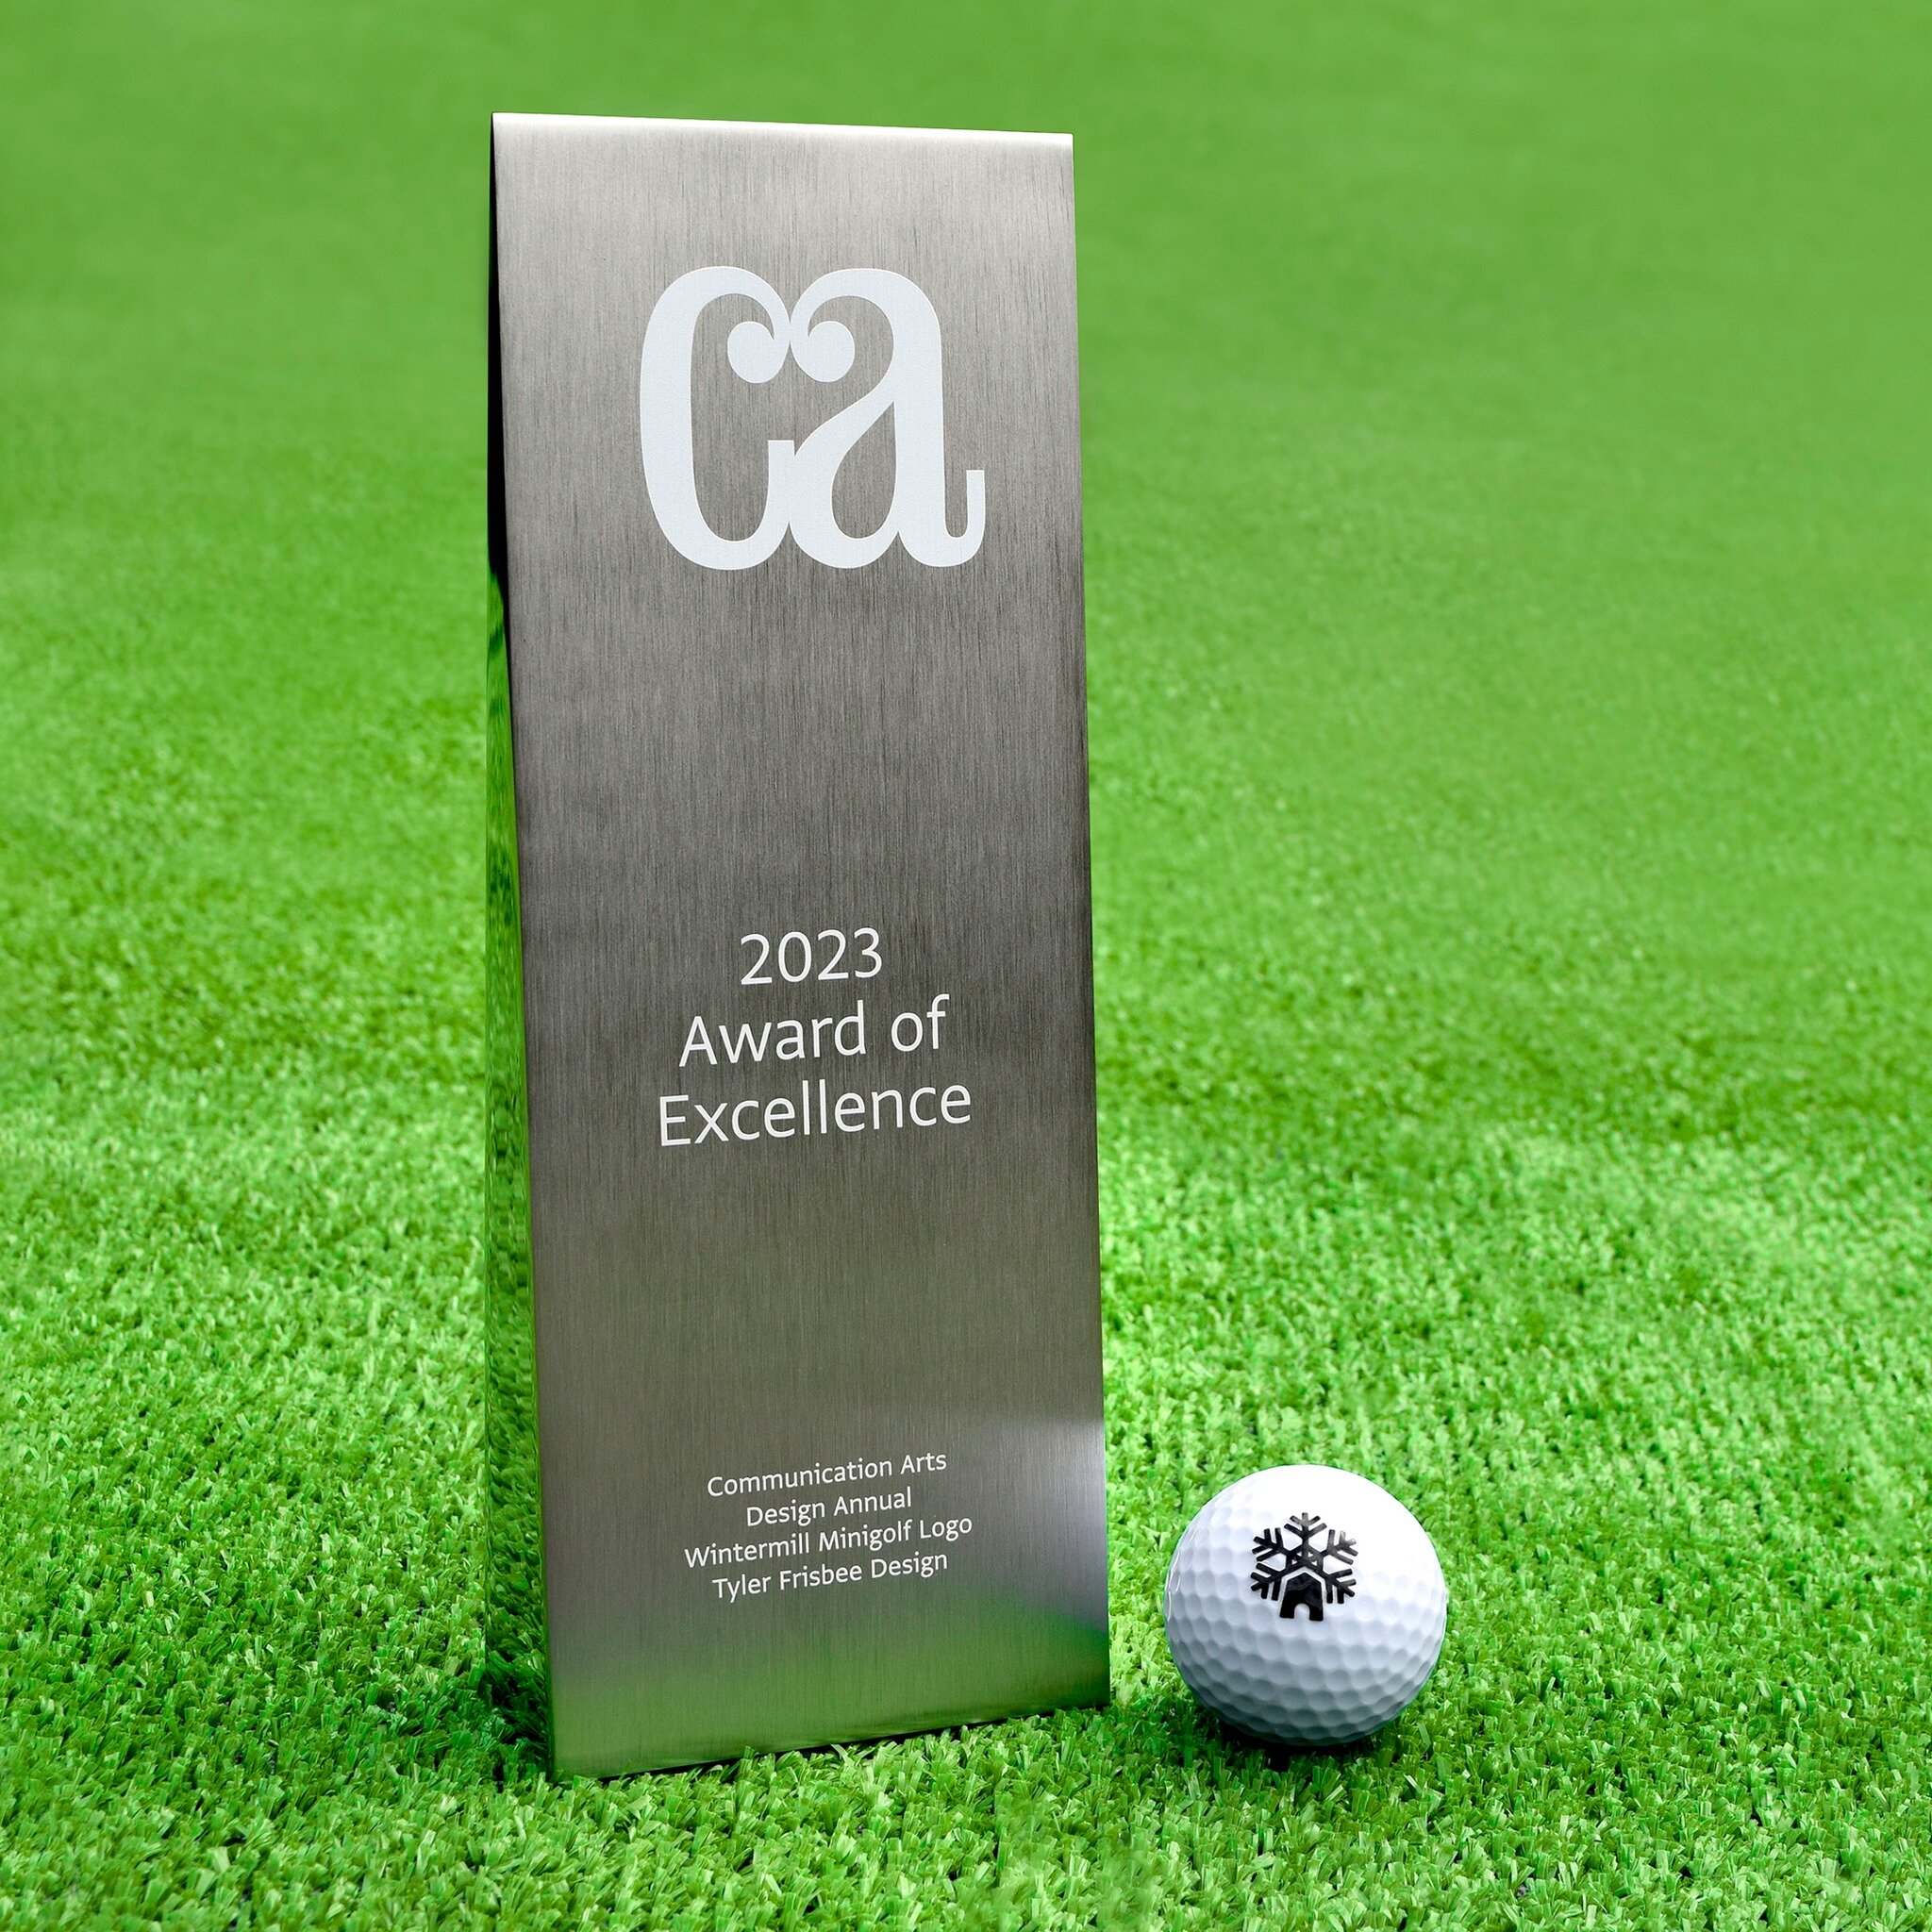 HOLE IN ONE! 🏌️ Just got this bad boy in the mail with a copy of the 2023 Design Annual (second slide). Pretty validating, as far as slabs of metal go. I&rsquo;m shocked I was able to make CommArts this year&mdash;and with a logo at that. Thanks for